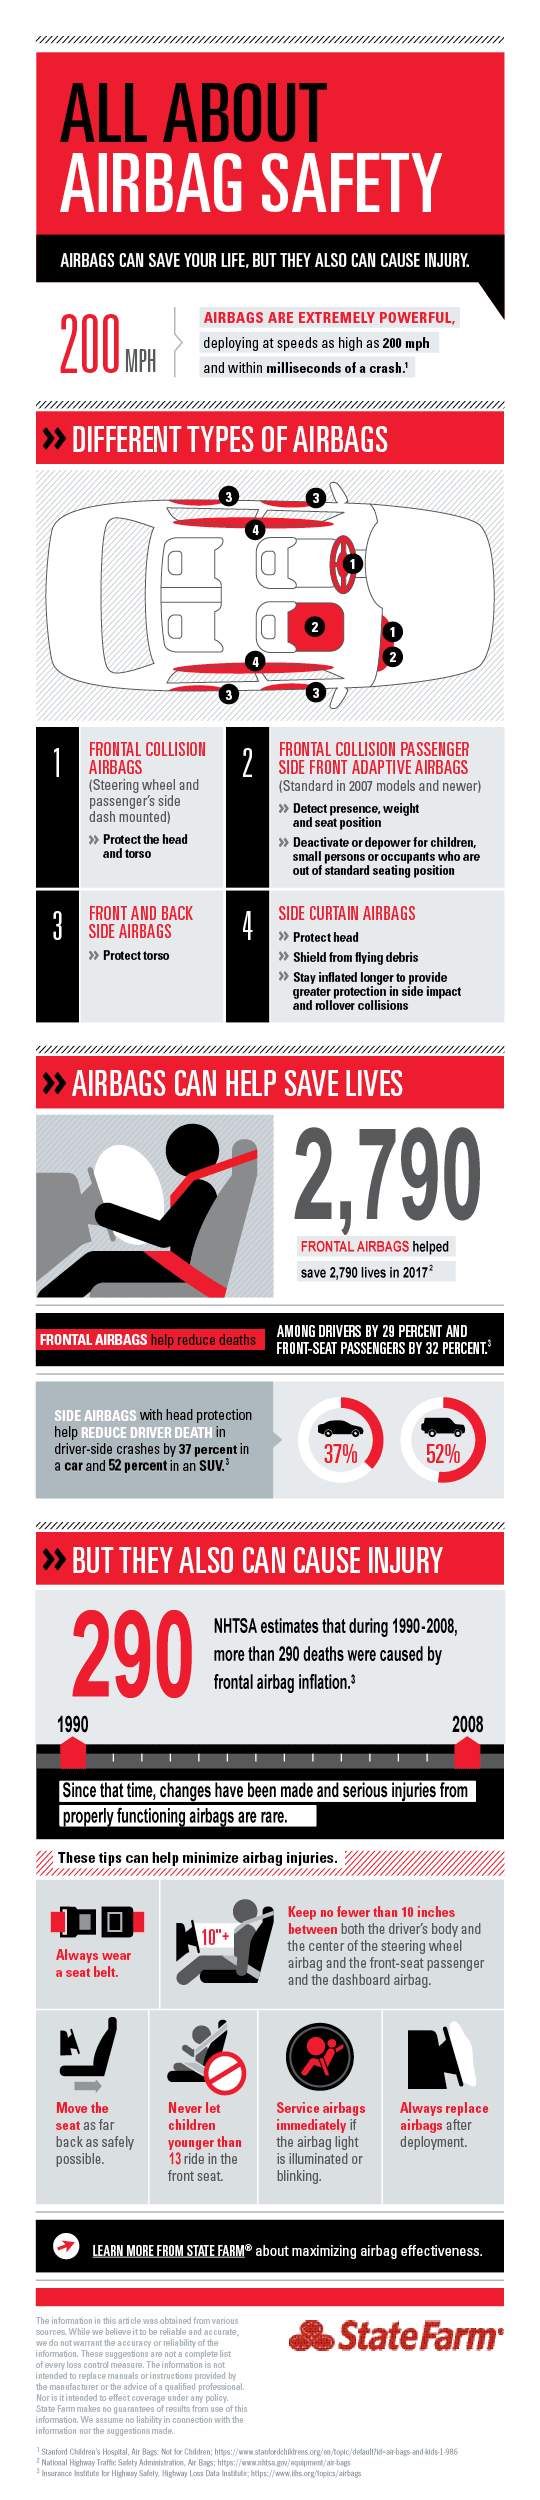 Infographic - How to Maximize Airbag Safety